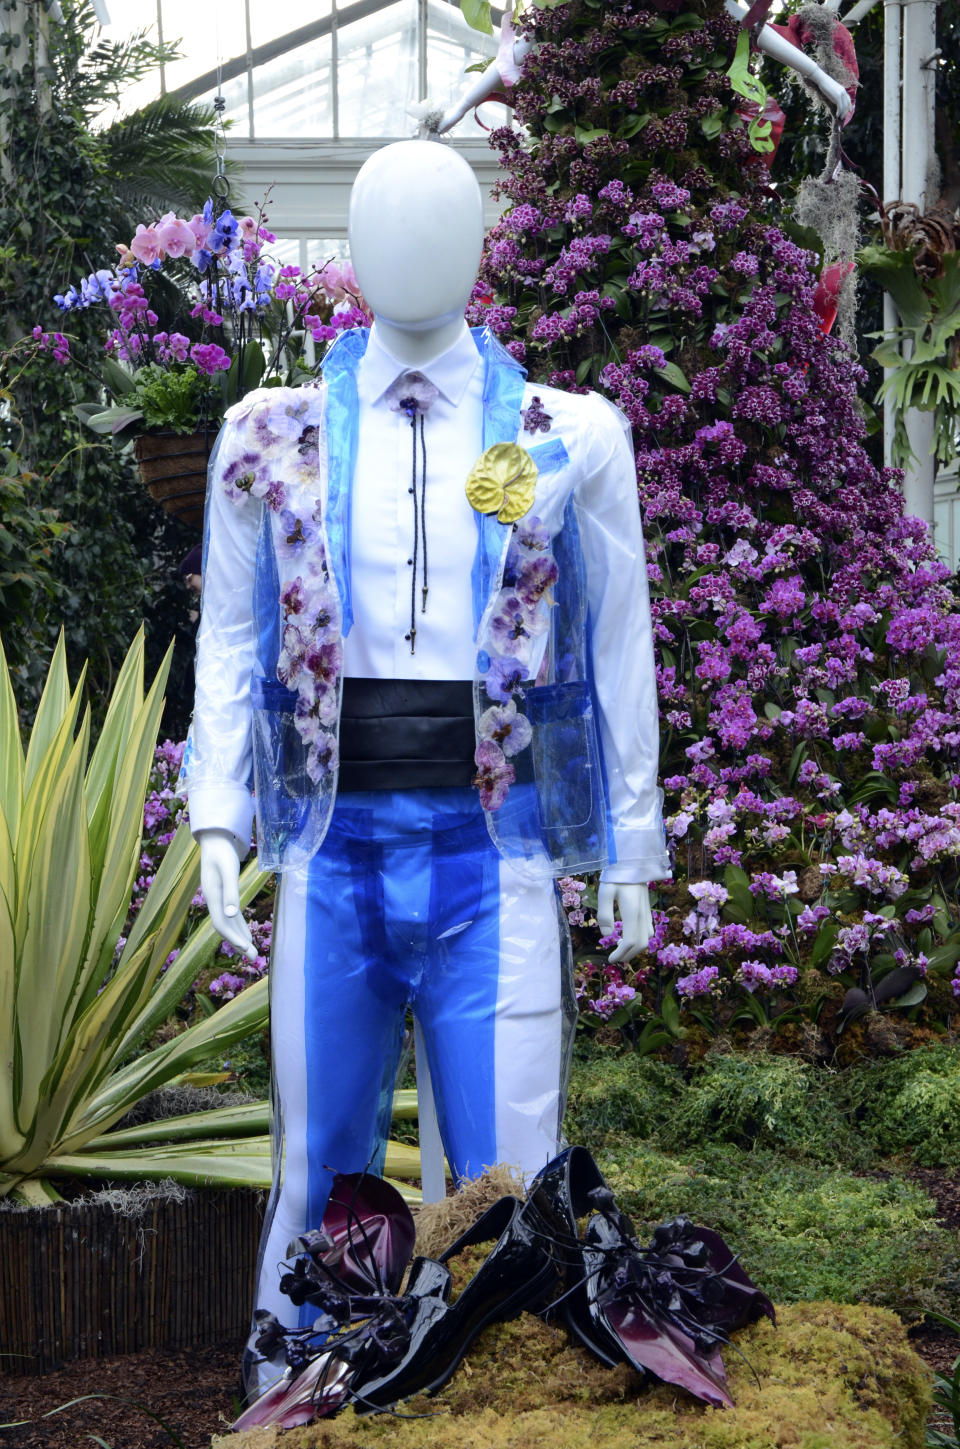 A fashion-creation inspired by nature from FLWR PSTL designed by Kristen Alpaugh in "The Orchid Show: Florals in Fashion" at The New York Botanical Garden, Saturday, Feb. 17, 2024, in the Bronx borough of New York. The mannequin in front wears an iridescent painted anthurium bloom and preserved orchid flowers. In back a mannequin wears a large cape of a variety of Phalaenopsis orchids in different shades of pink and purple, accented with mini ferns. (AP Photo/Pamela Hassell)